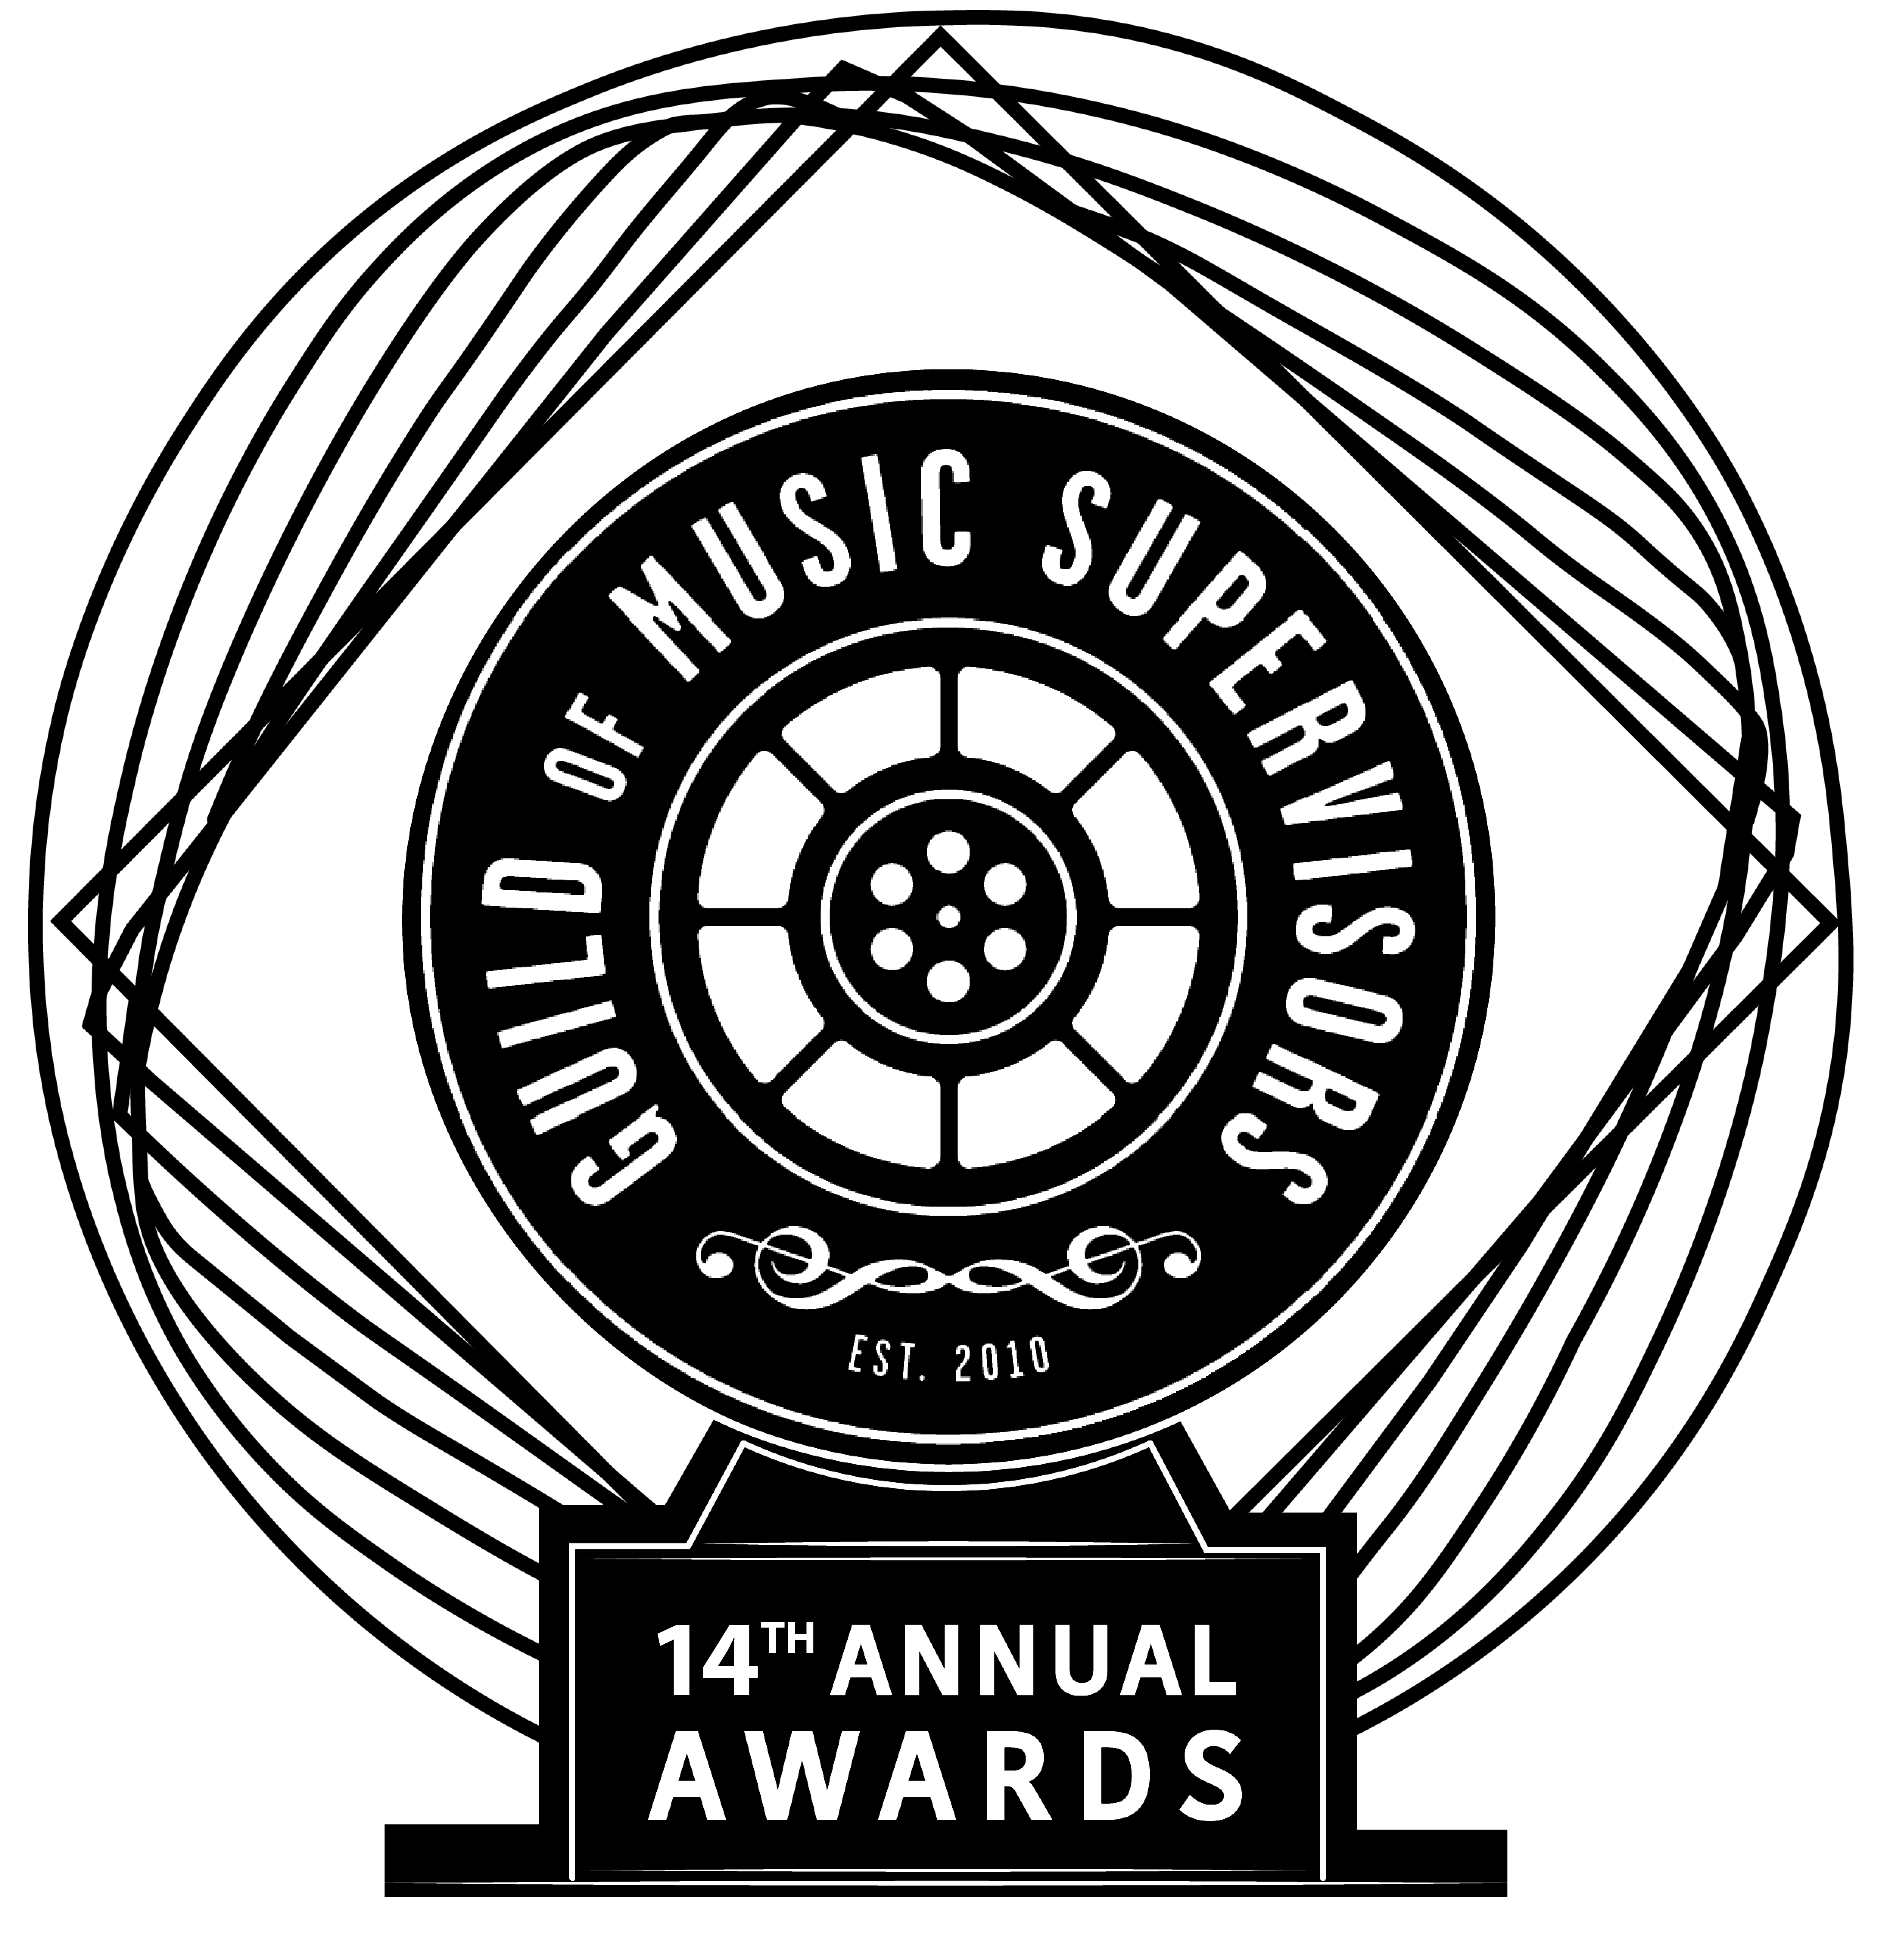 14th Annual Guild of Music Supervisors Awards Winners